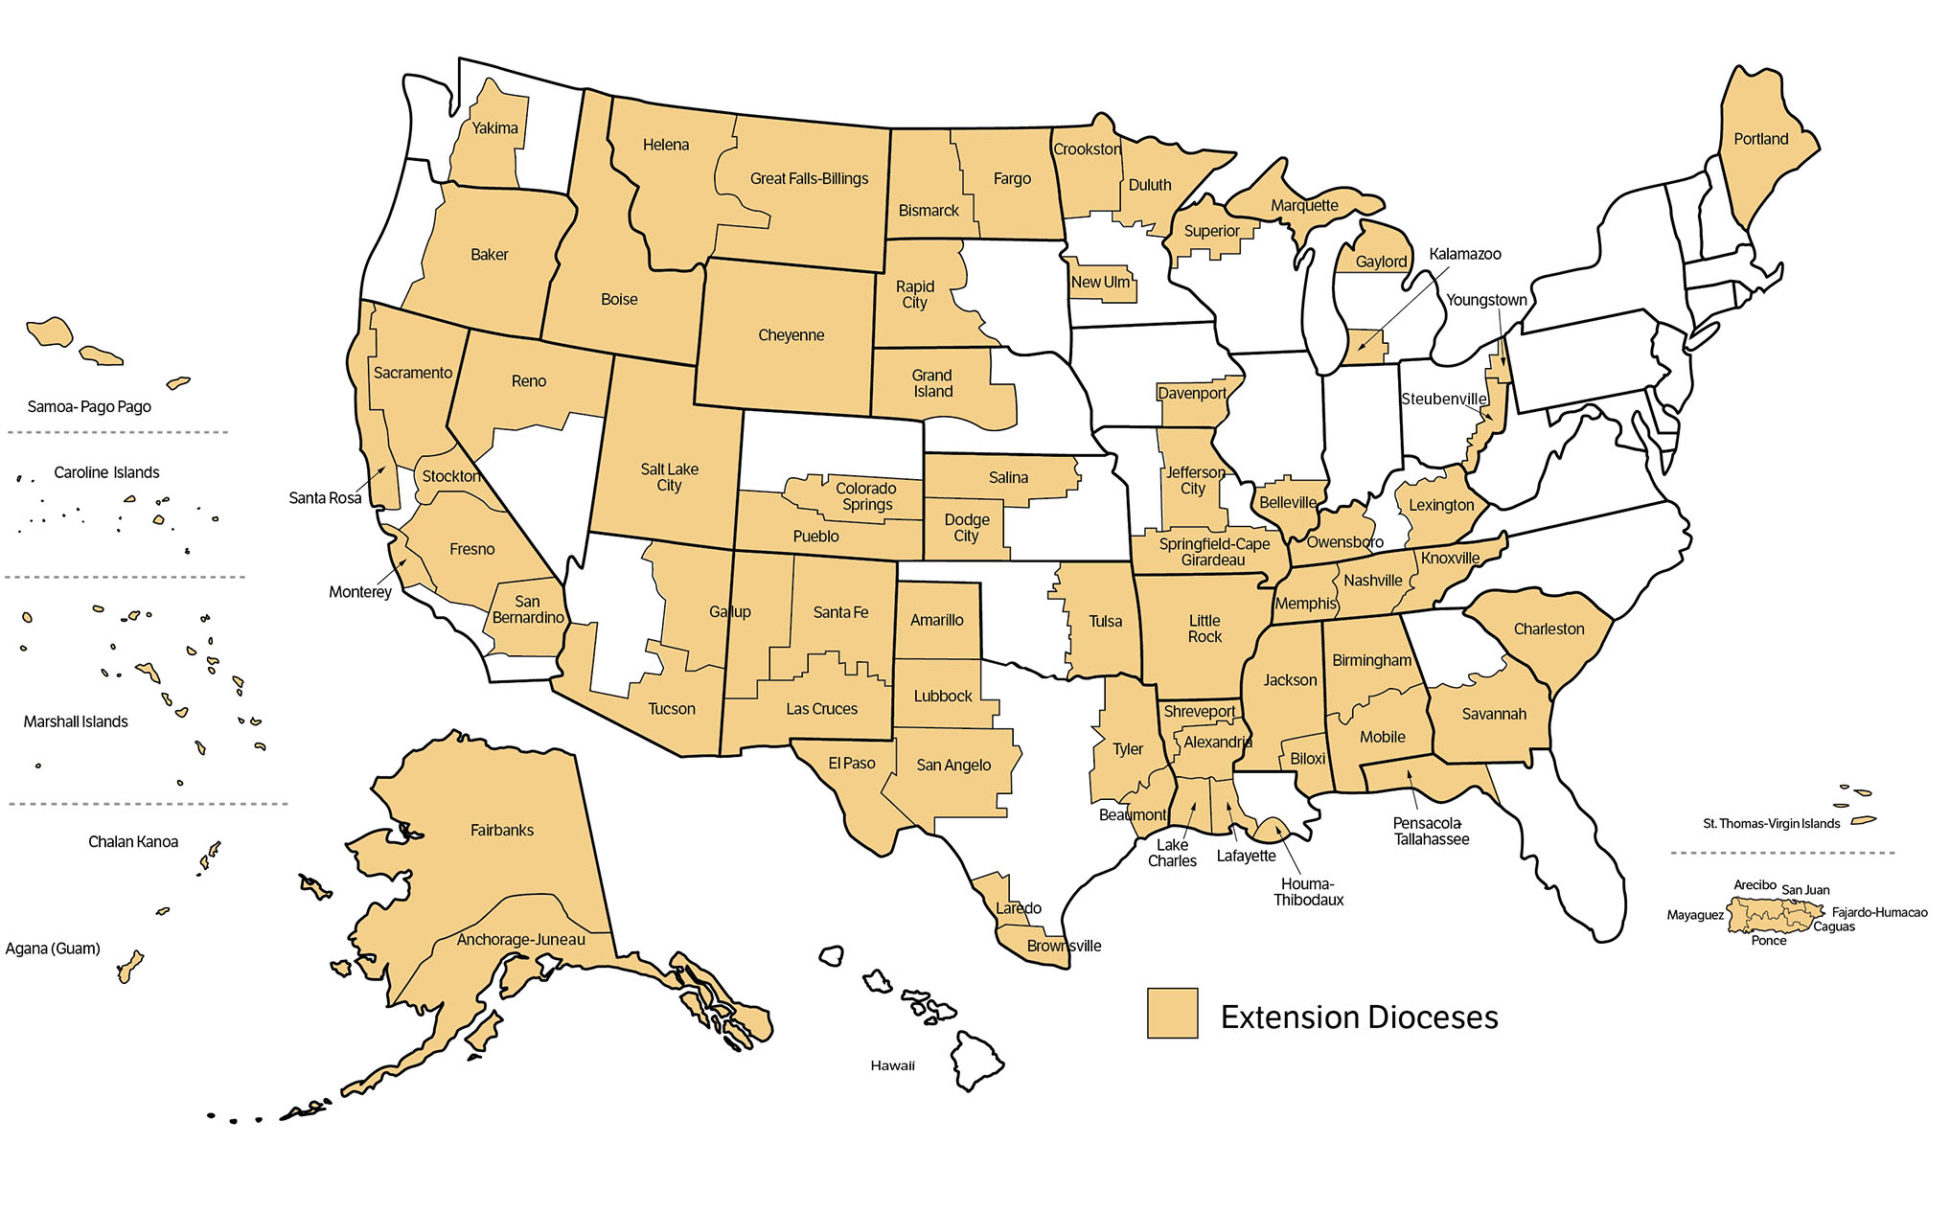 Dioceses supported by Catholic Extension Society